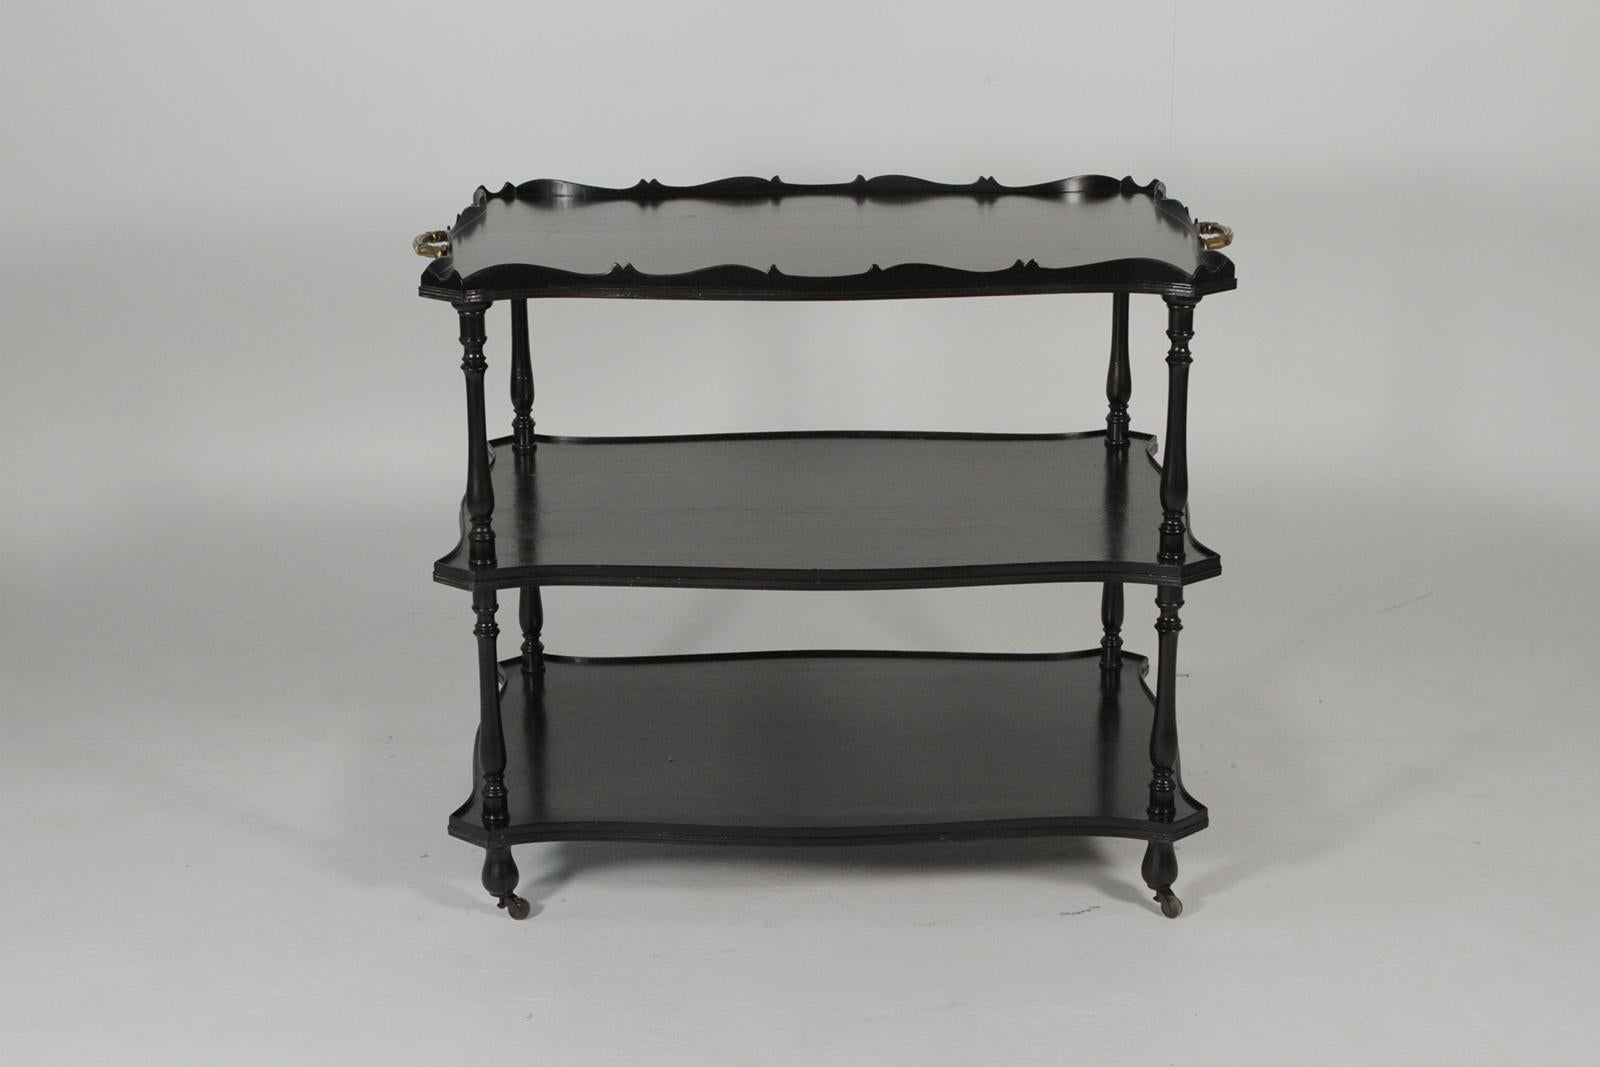 Three-tiered ebonized beverage dessert cart with cast bronze handles in the manner of Maison Jansen. The large cart with three shelves the top with a scalloped gallery edge. The front and back with high quality cast gilt bronze handles.